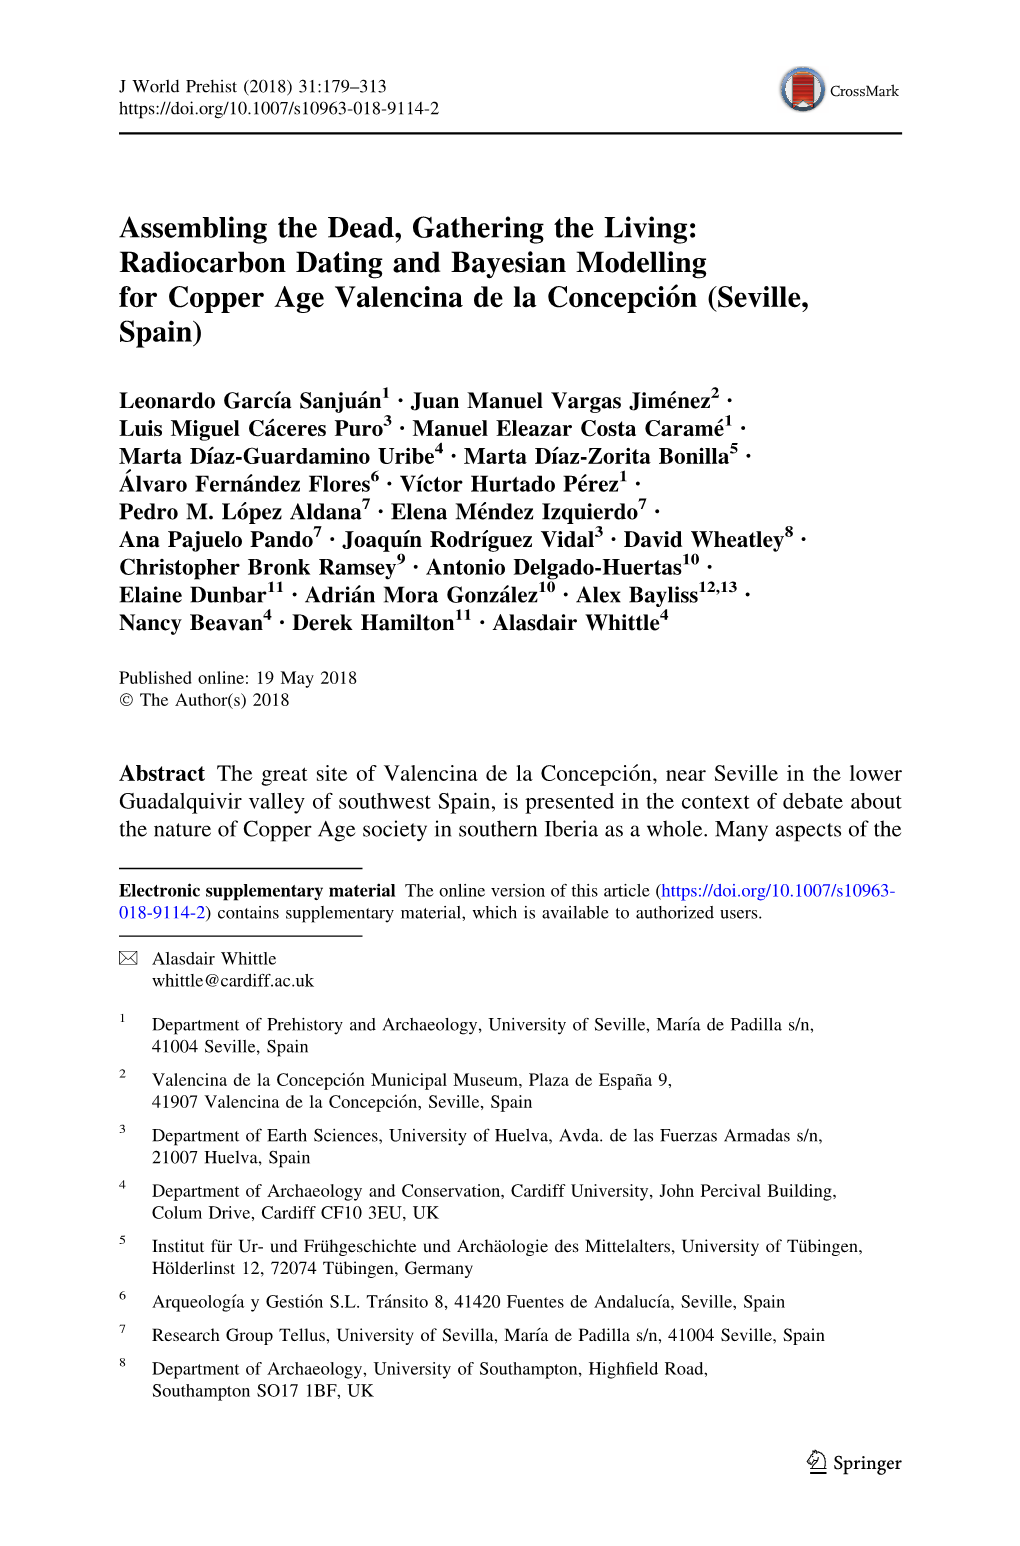 Radiocarbon Dating and Bayesian Modelling for Copper Age Valencina De La Concepcio´N (Seville, Spain)